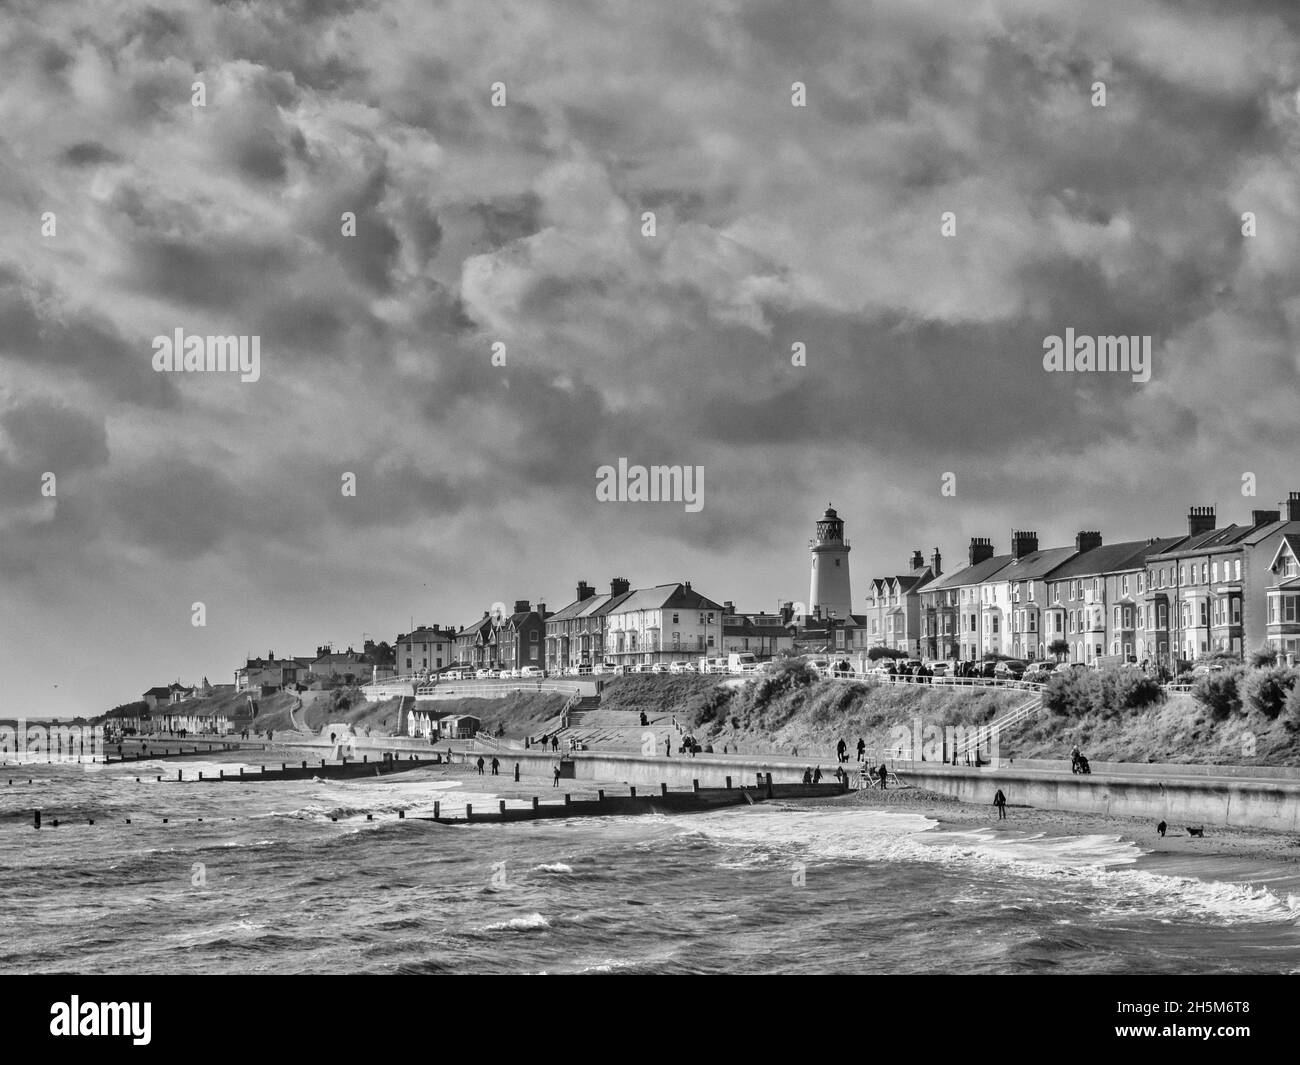 Pictorial image of the coastal resort town of Southwold in the county of Suffolk of East Anglia in Southwest England Stock Photo